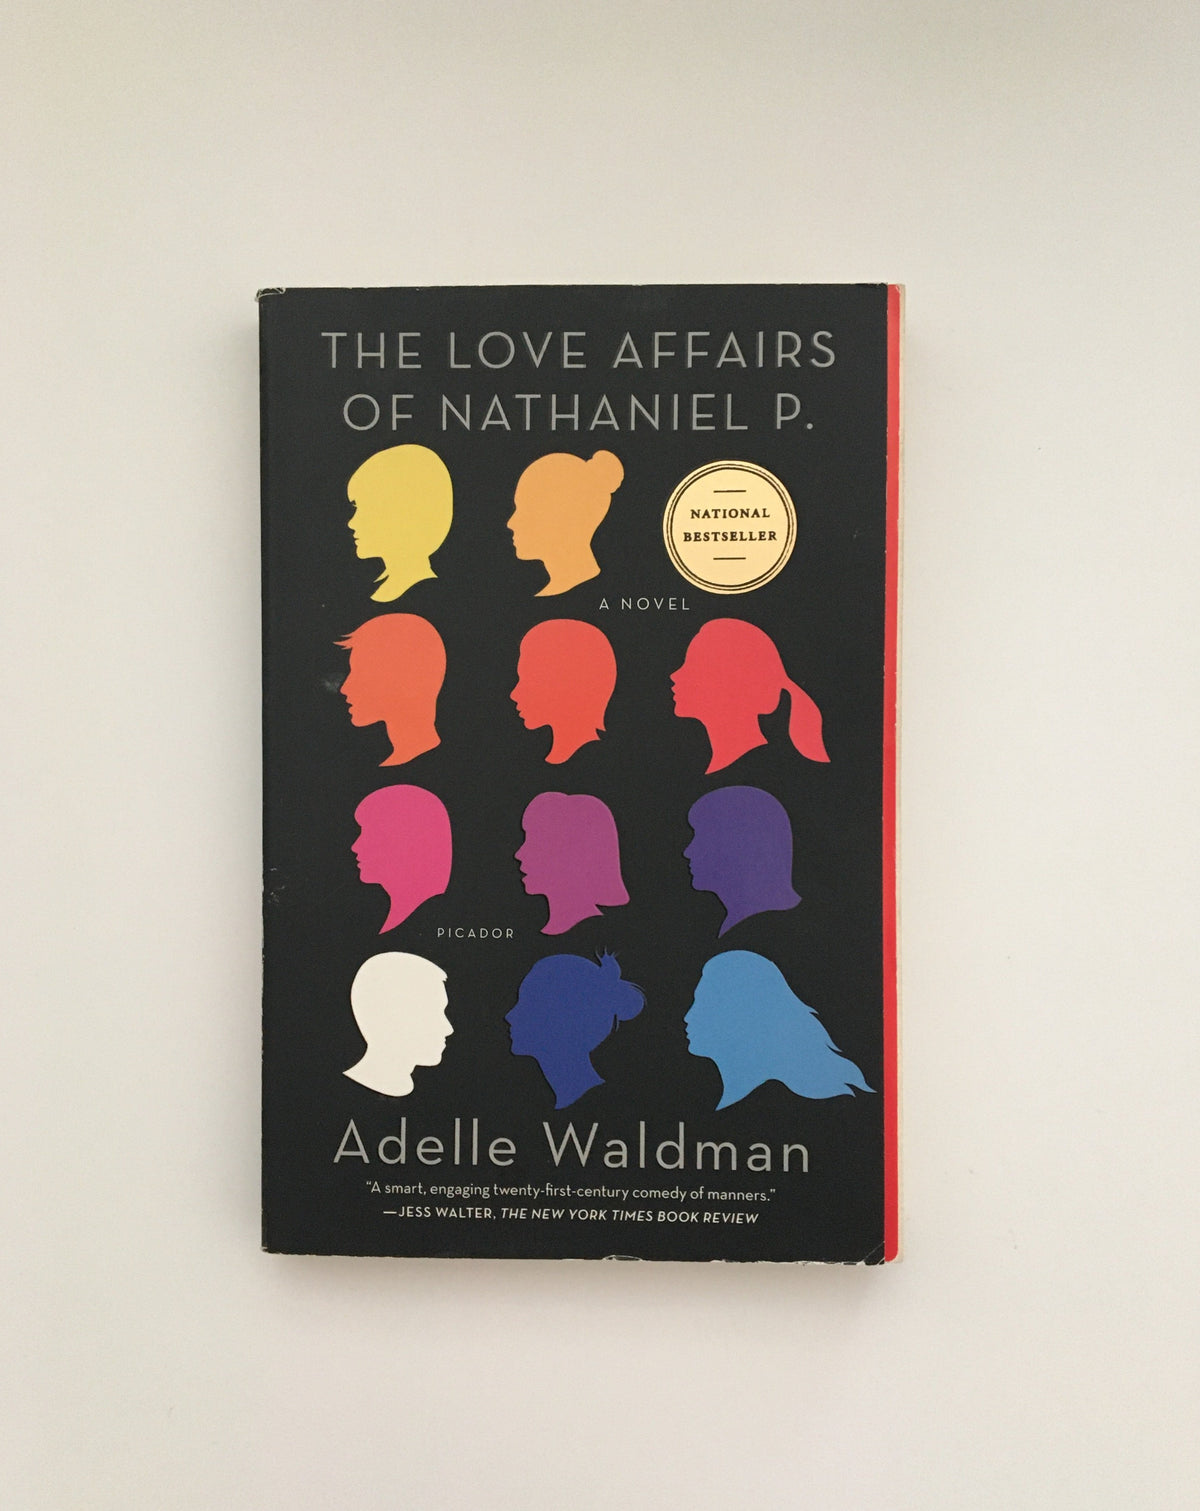 The Love Affairs of Nathaniel P. by Adelle Waldman